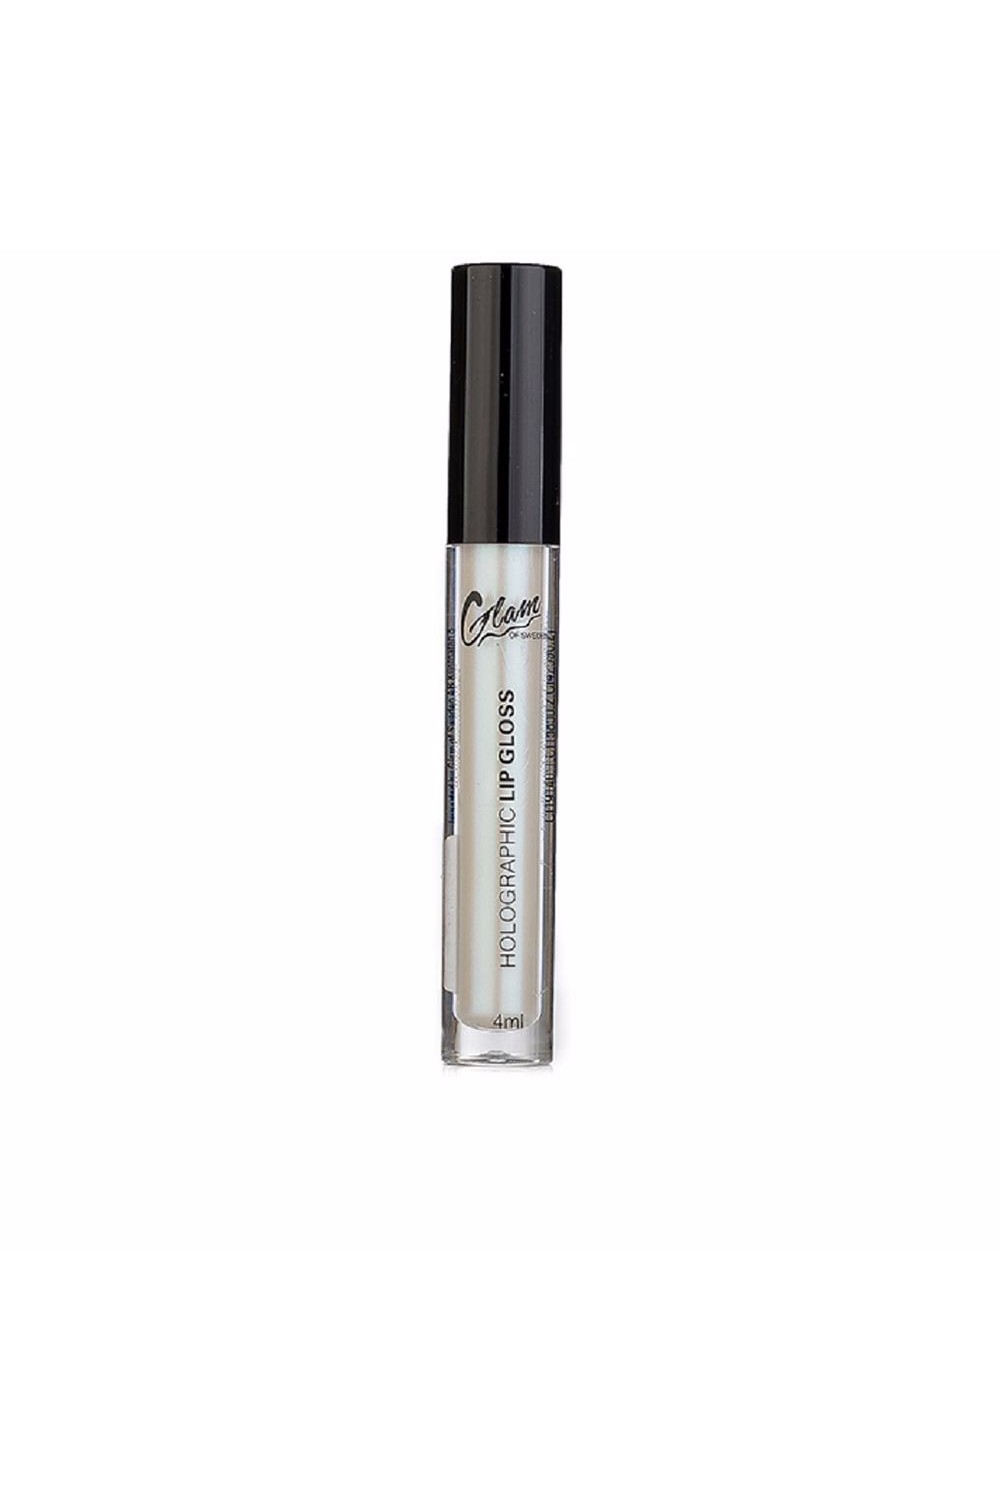 Glam Of Sweden Holographic Lipgloss 1 4ml